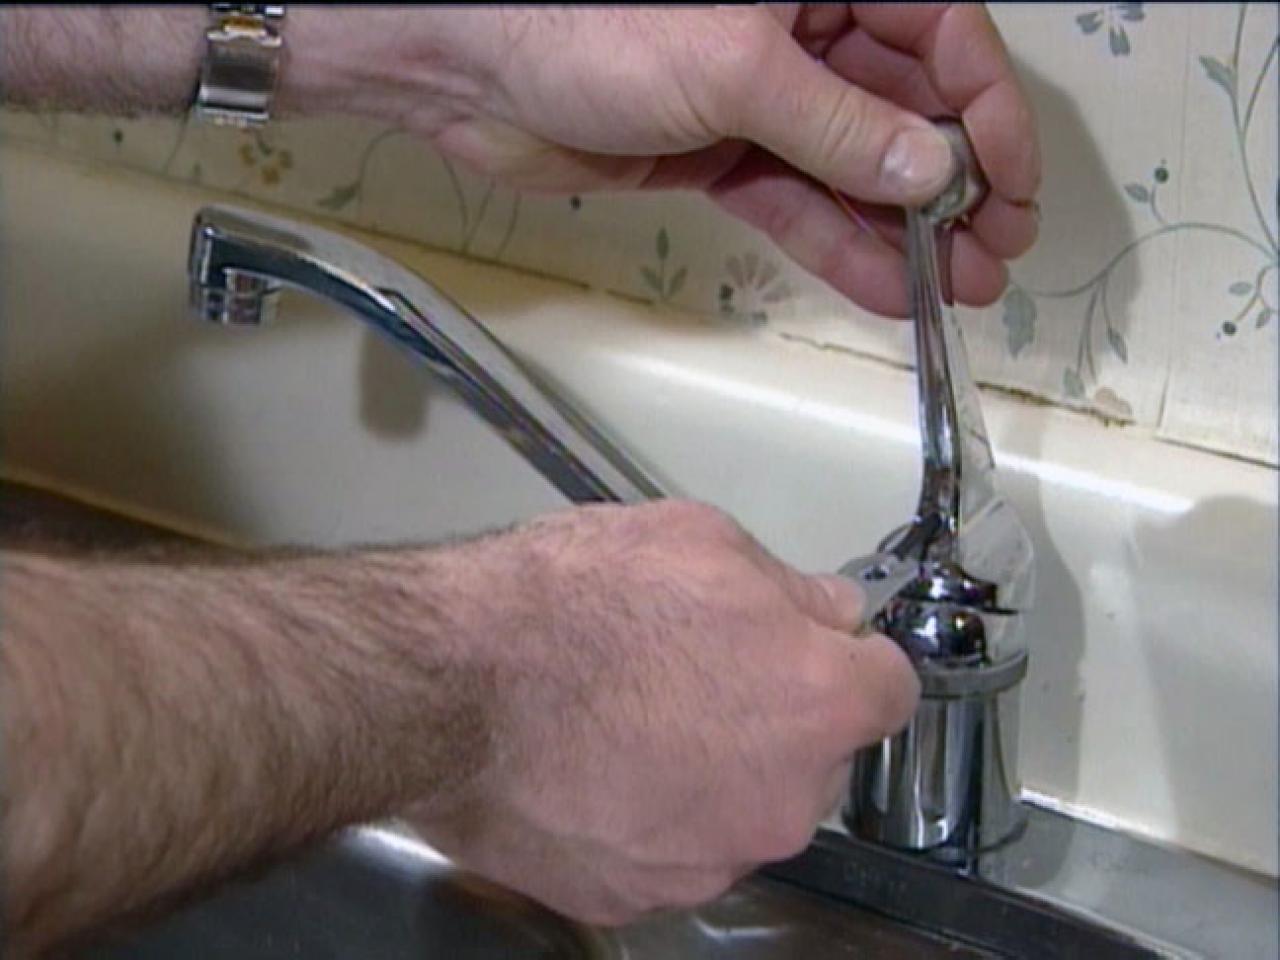 Repairing A Kitchen Faucet How Tos Diy truly kitchen sink faucet handle broke off for Your home